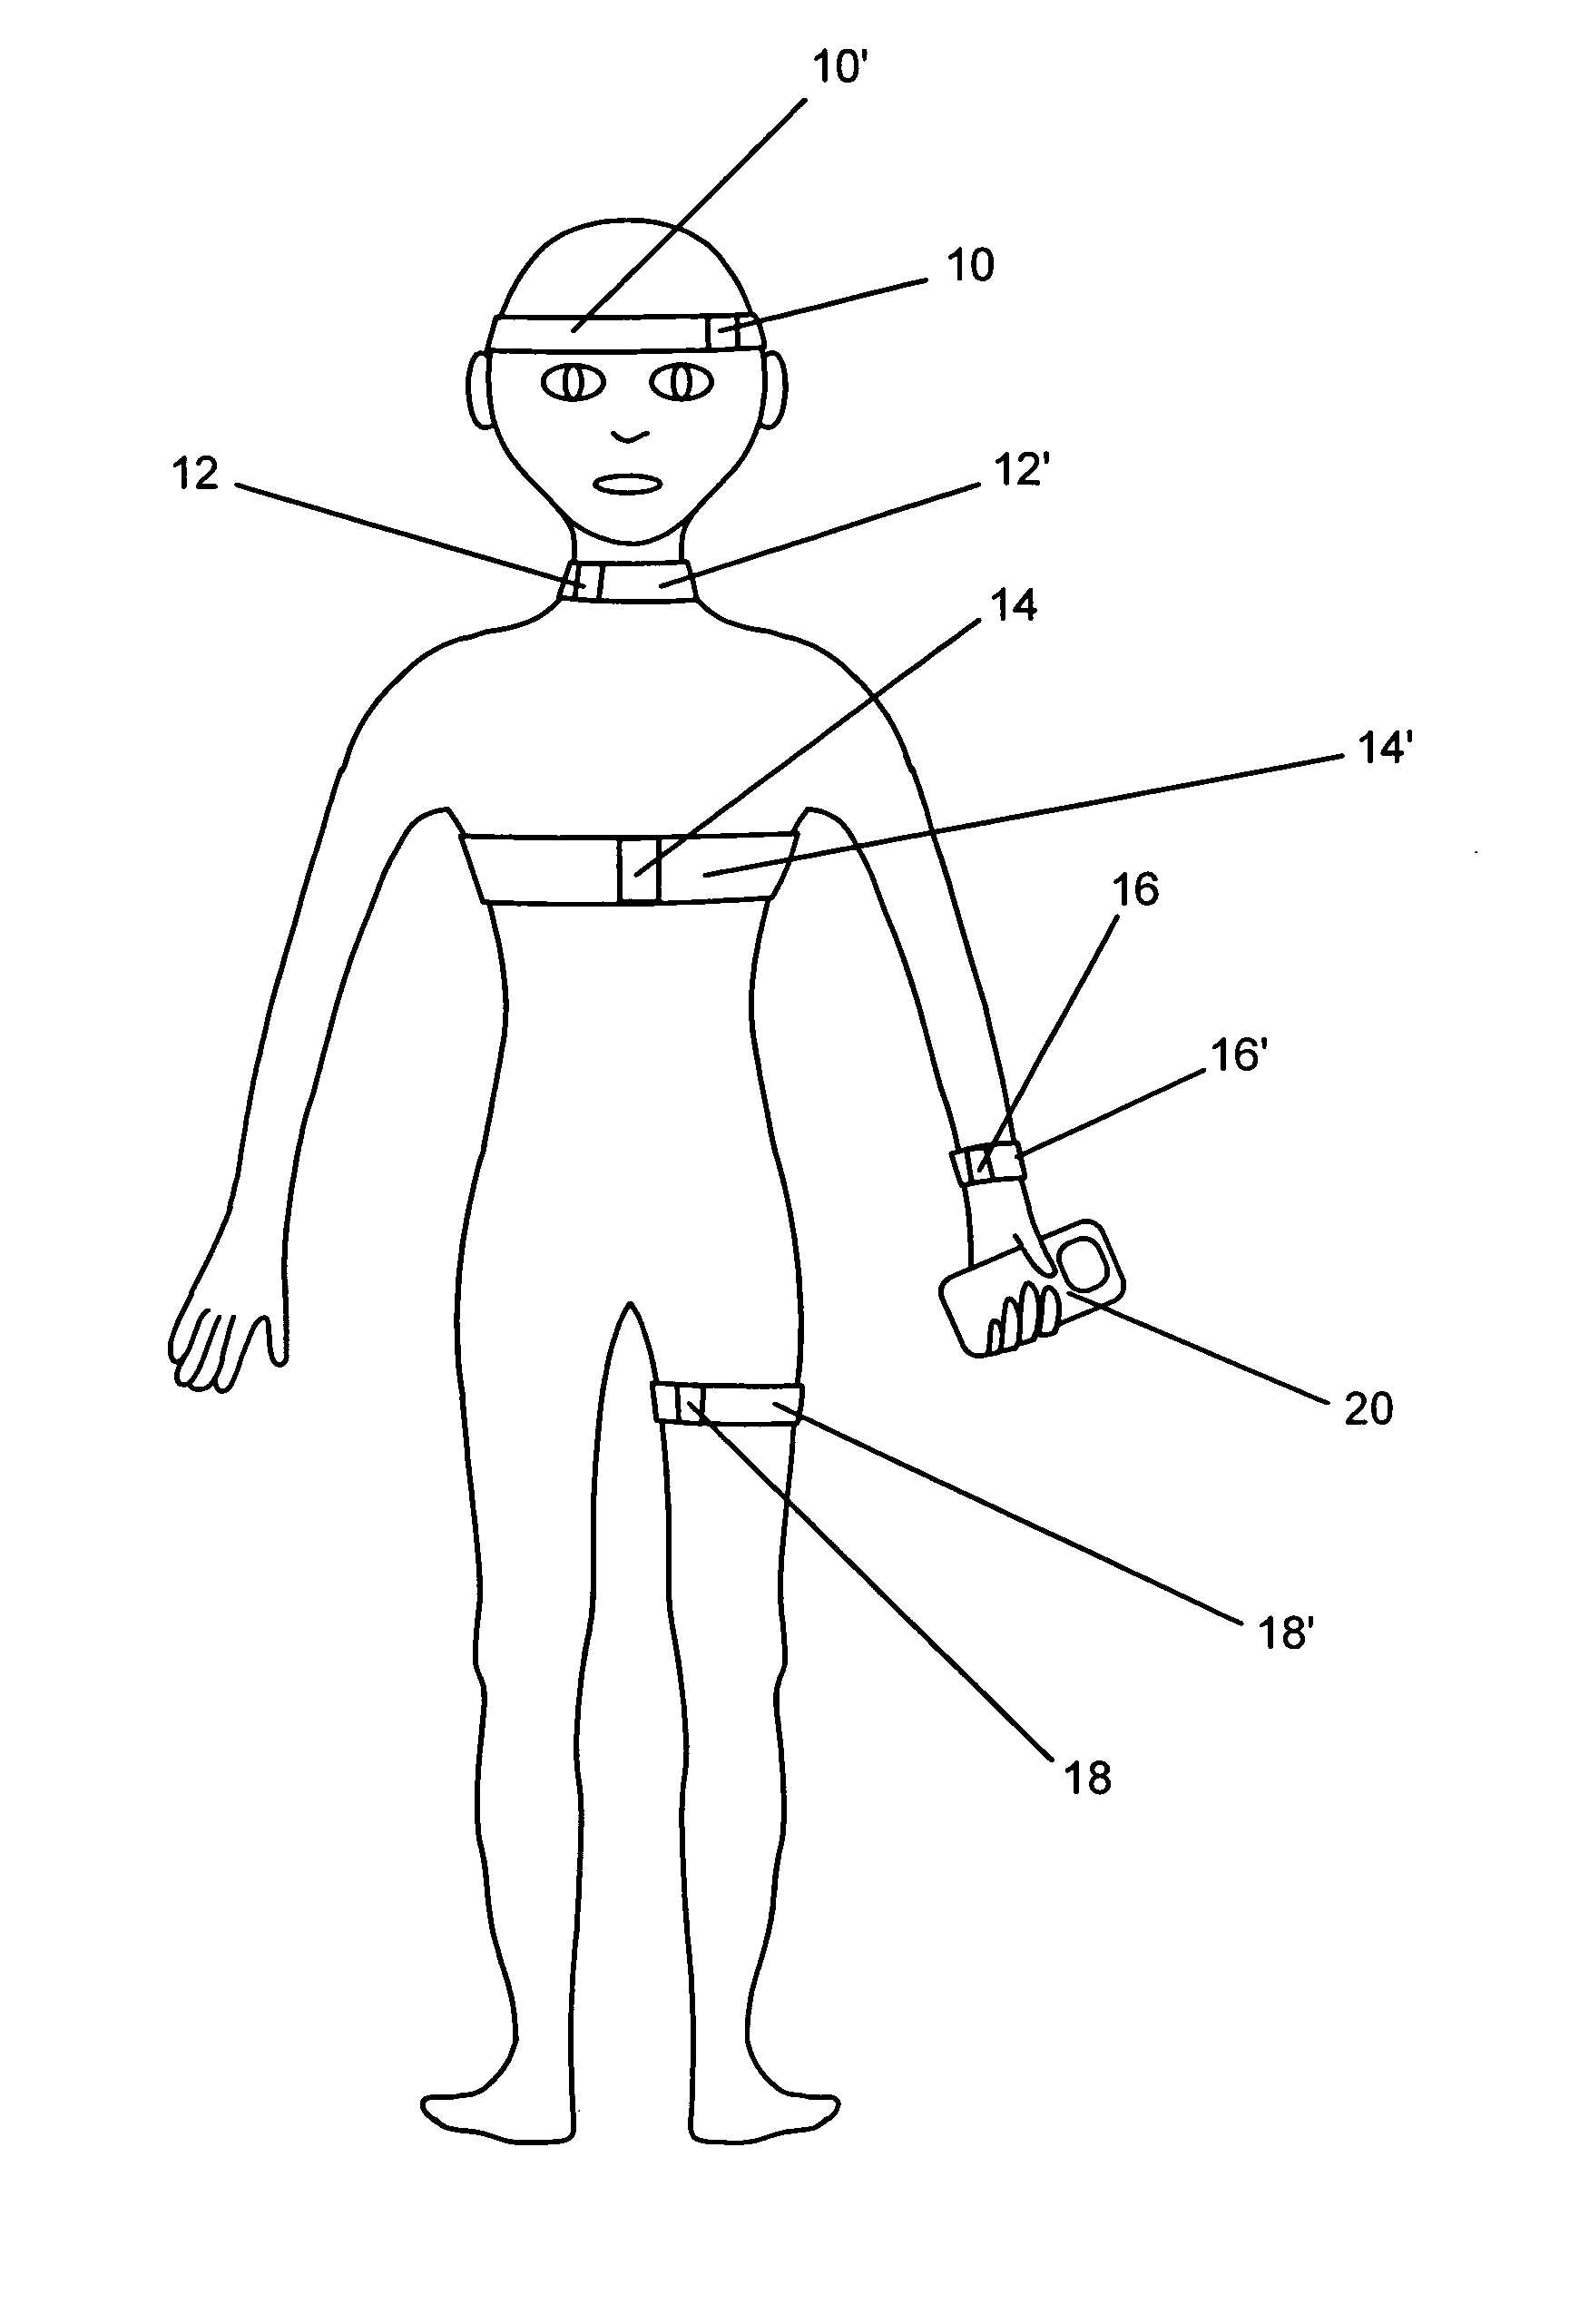 Systems and methods for non-invasive detection and monitoring of cardiac and blood parameters